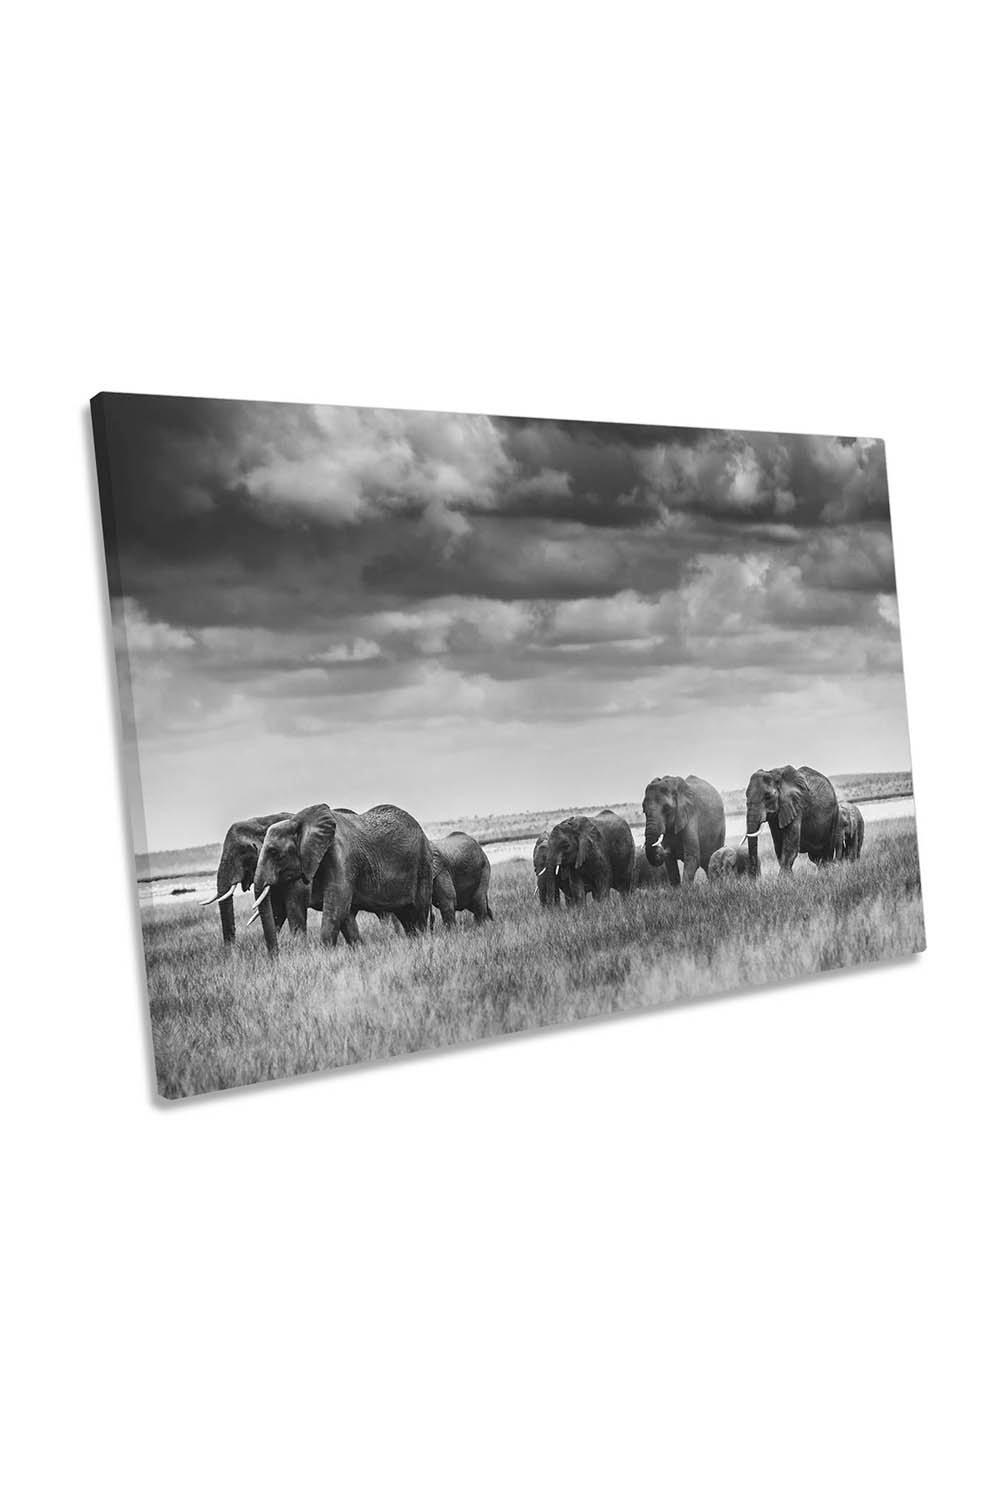 Elephant Family Black and White Canvas Wall Art Picture Print